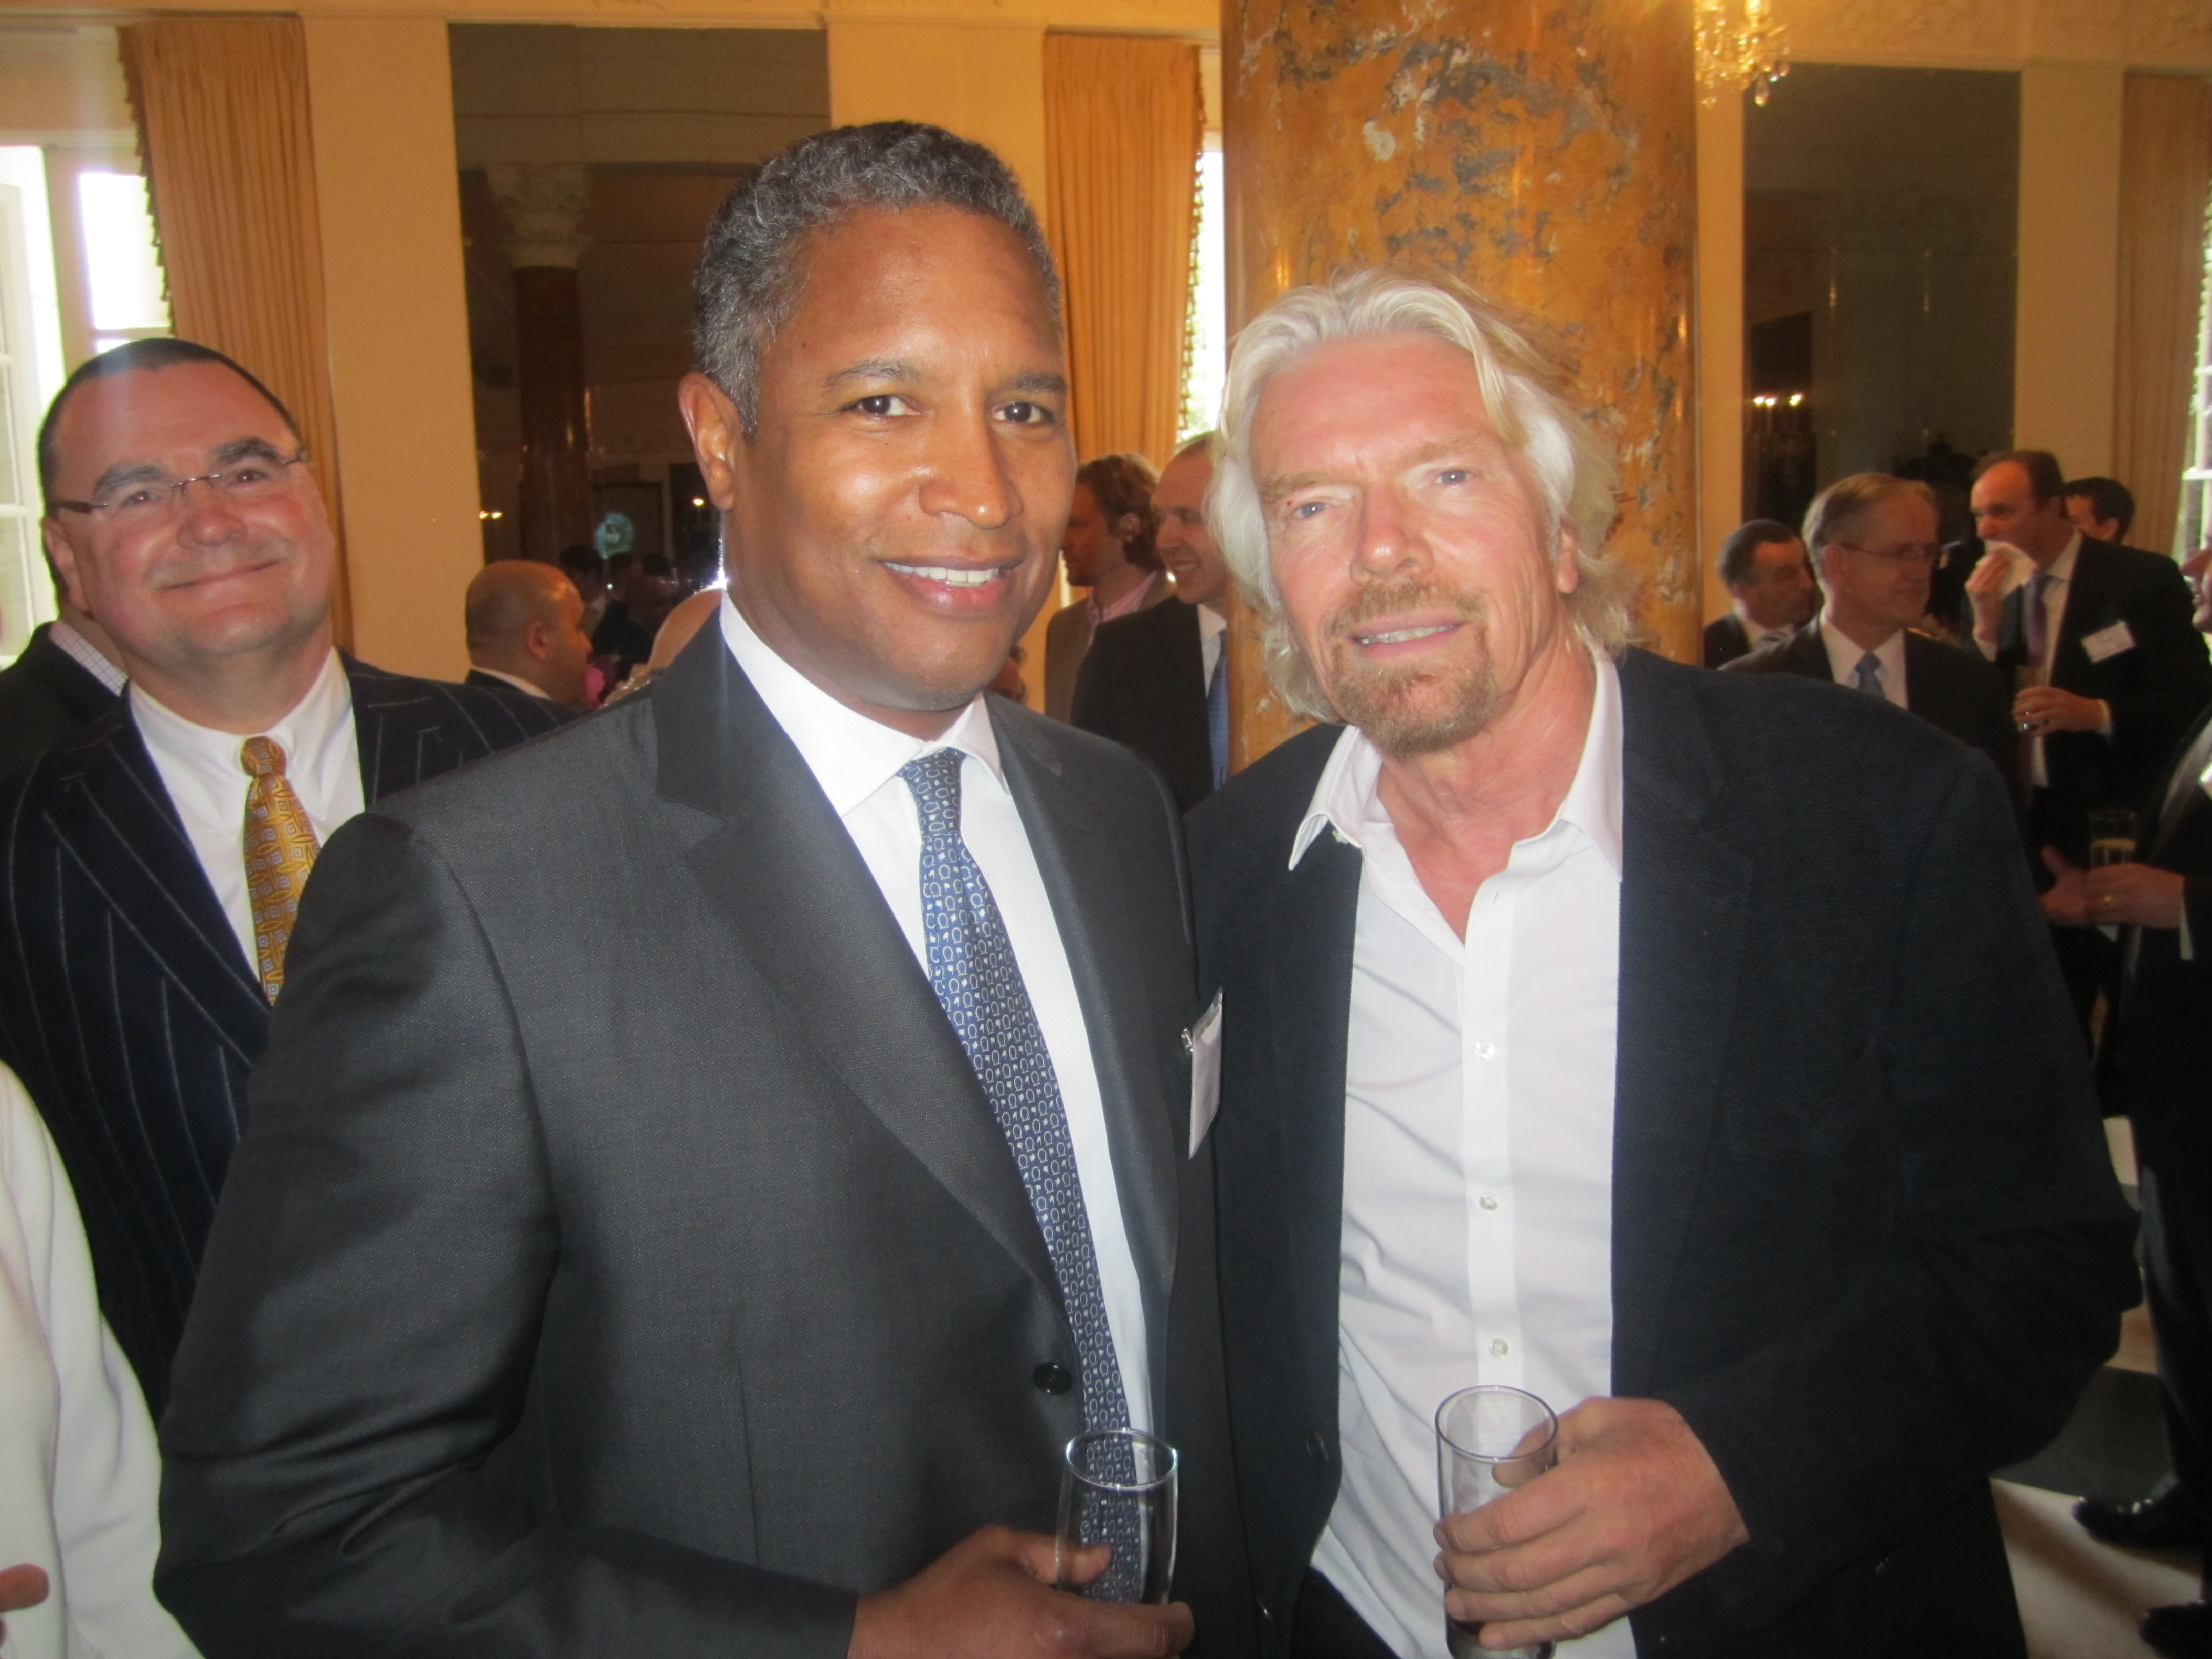 Sir Richard Branson, Guest of Honor at the British Ambassador’s Residence